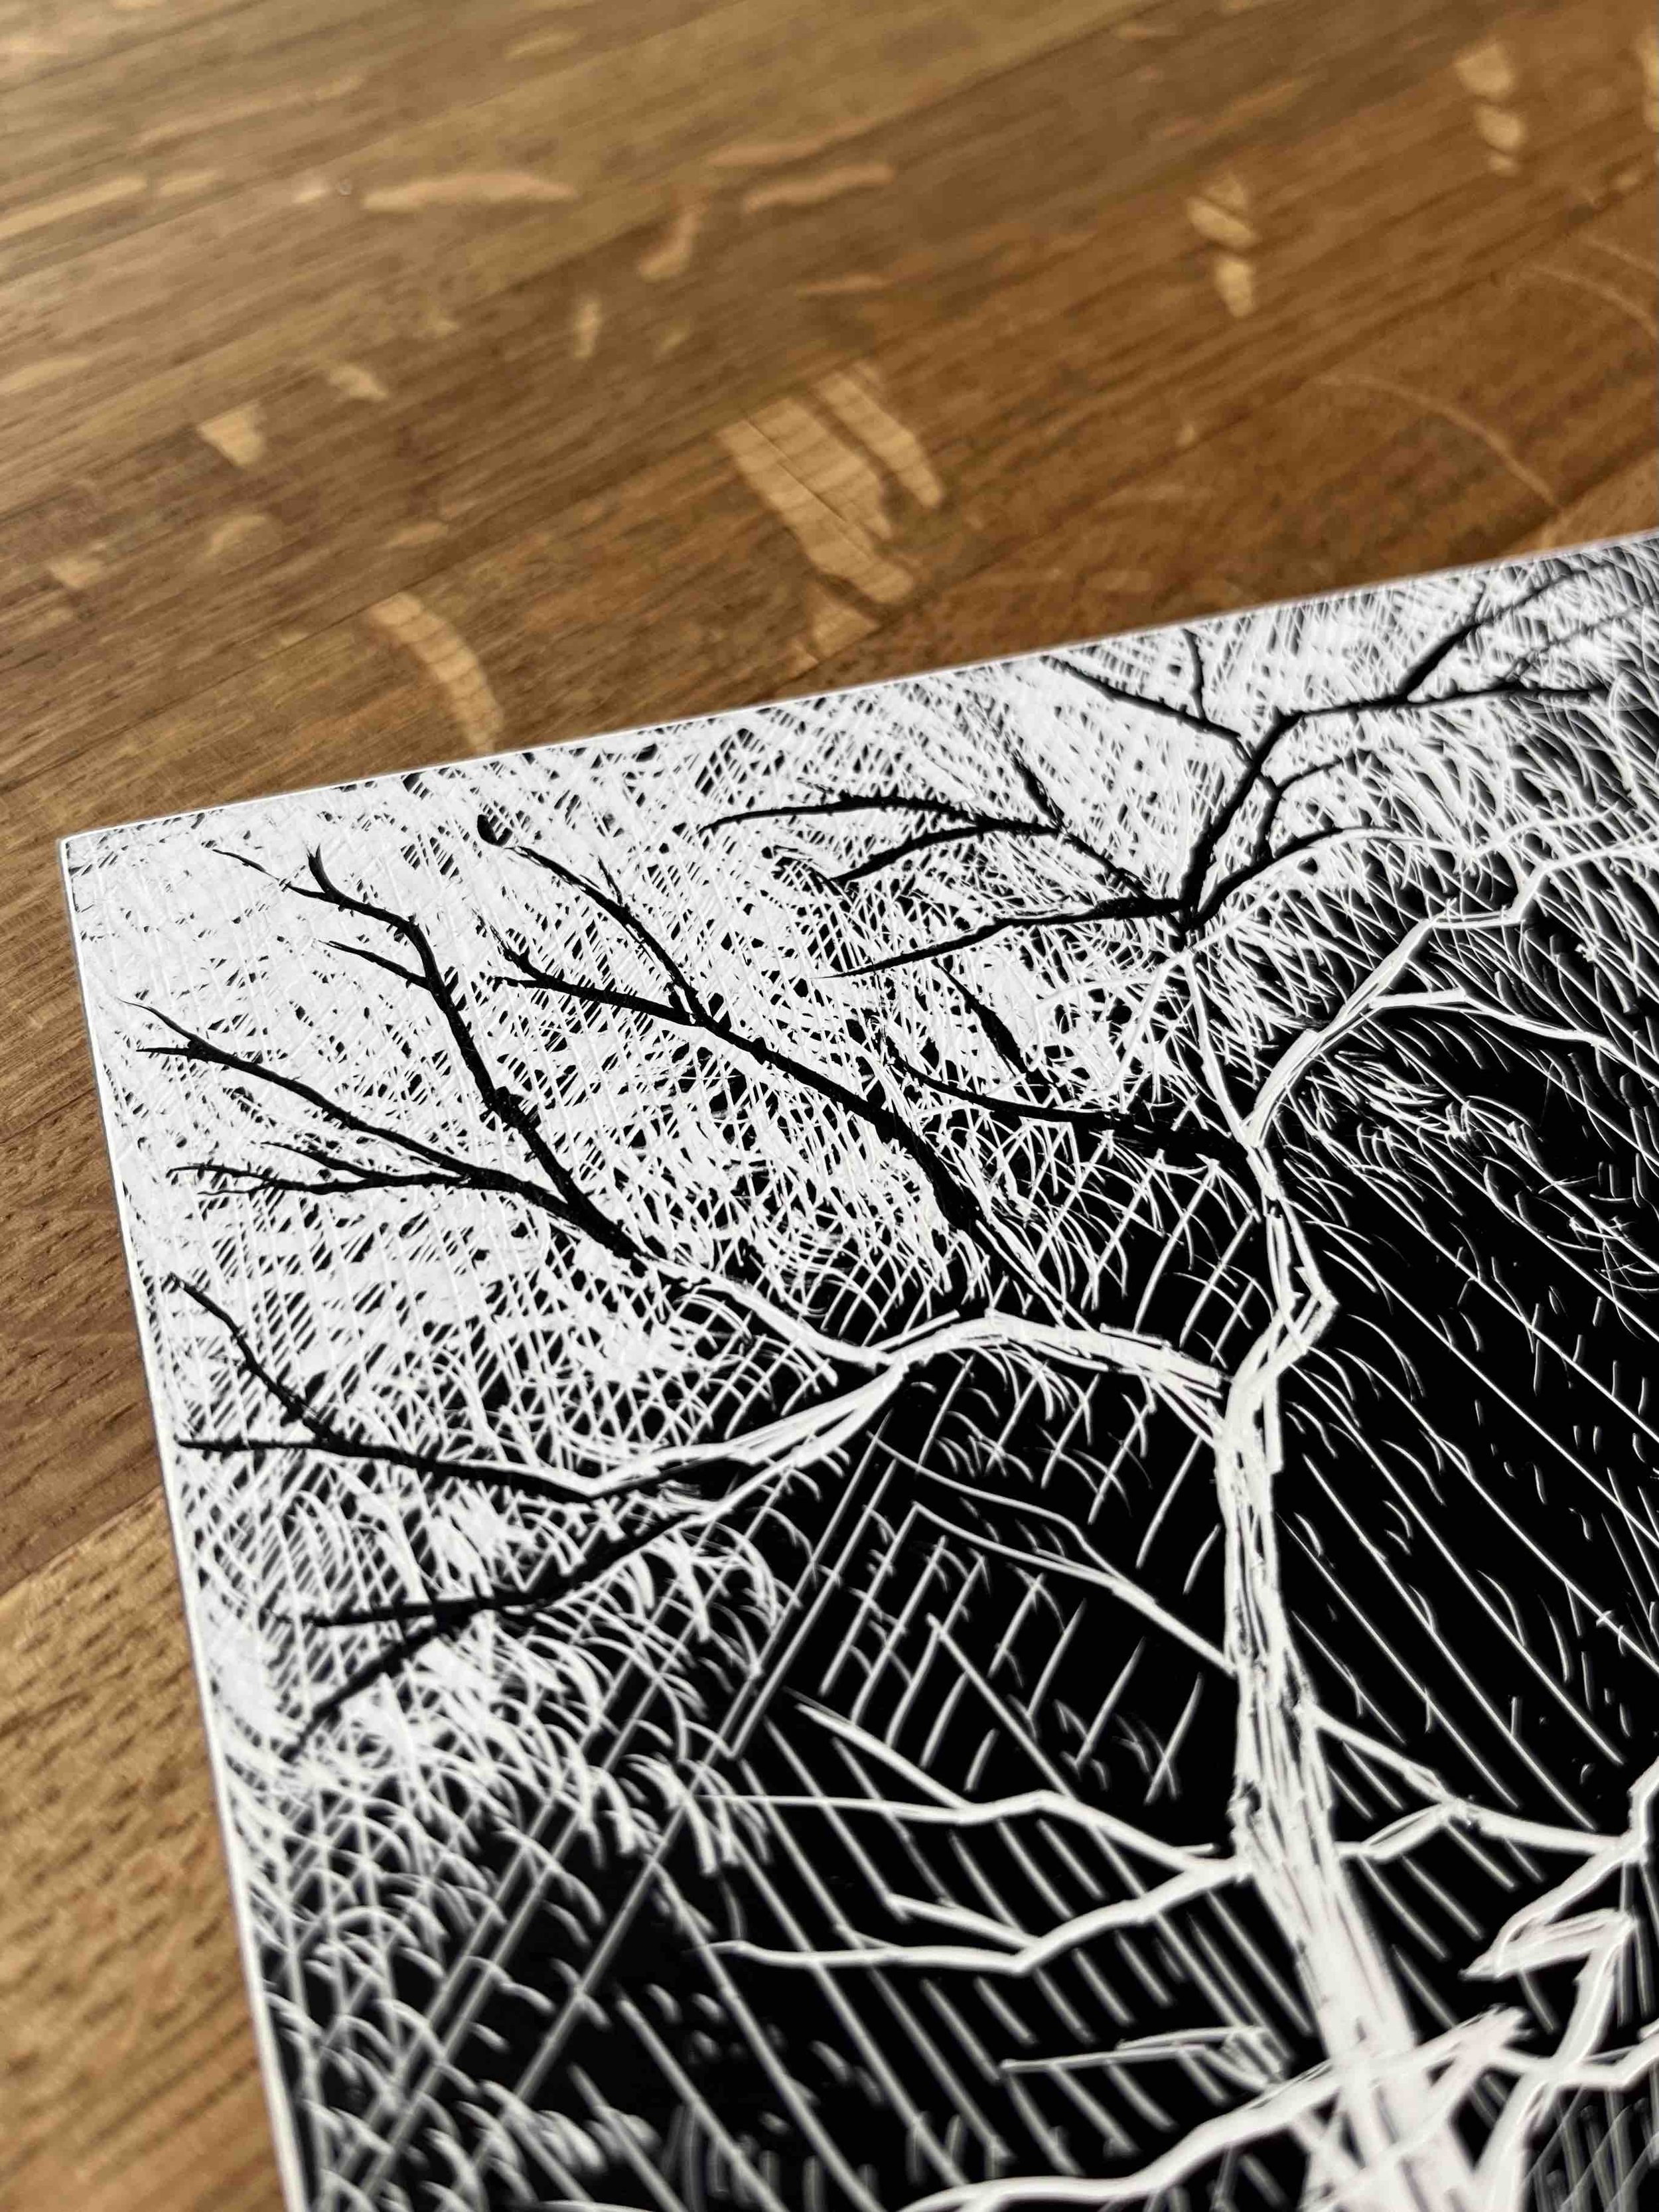 Sycamore Tree Abstract Black & White Original Artwork Scratchboard Etching Close Up.jpg